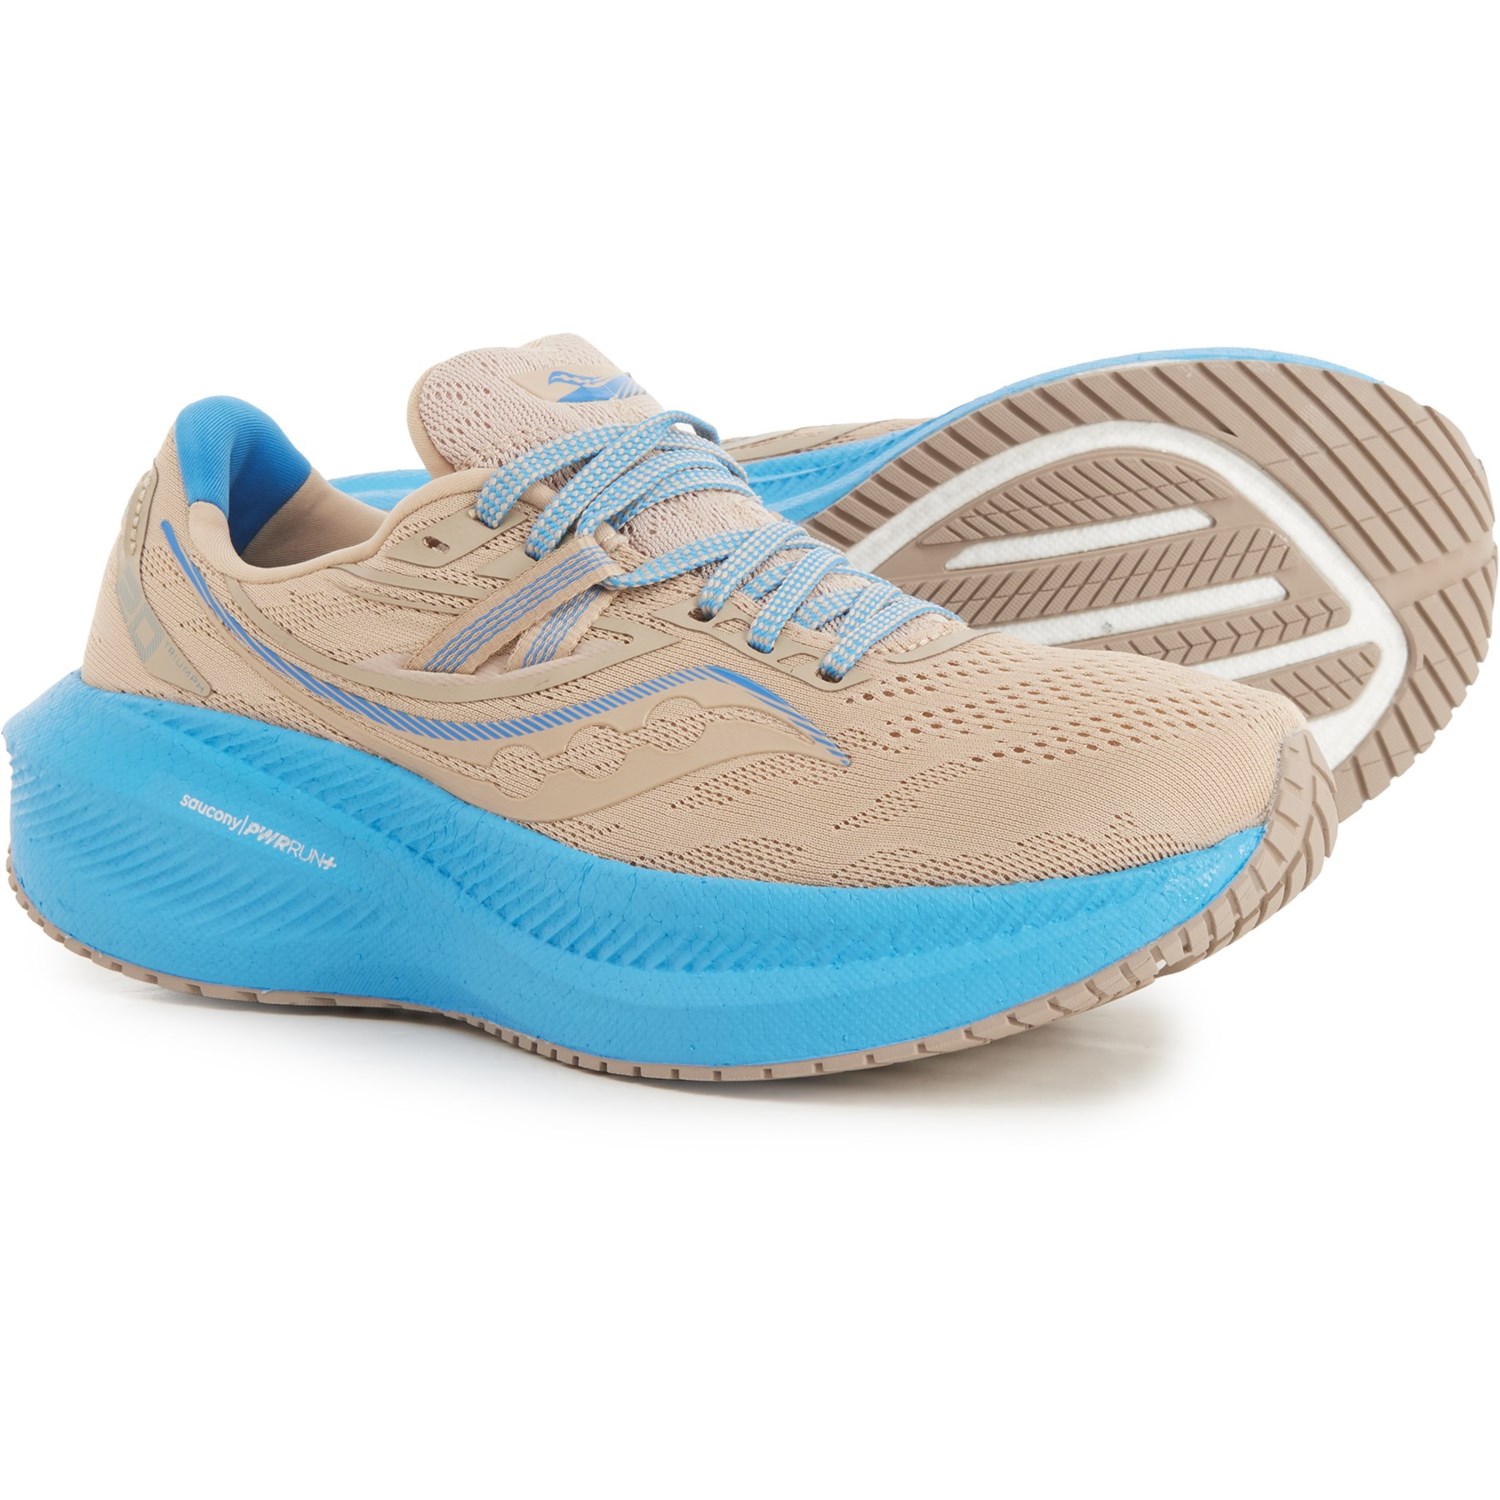 Saucony Triumph 20 Running Shoes (For Women) - Save 46%